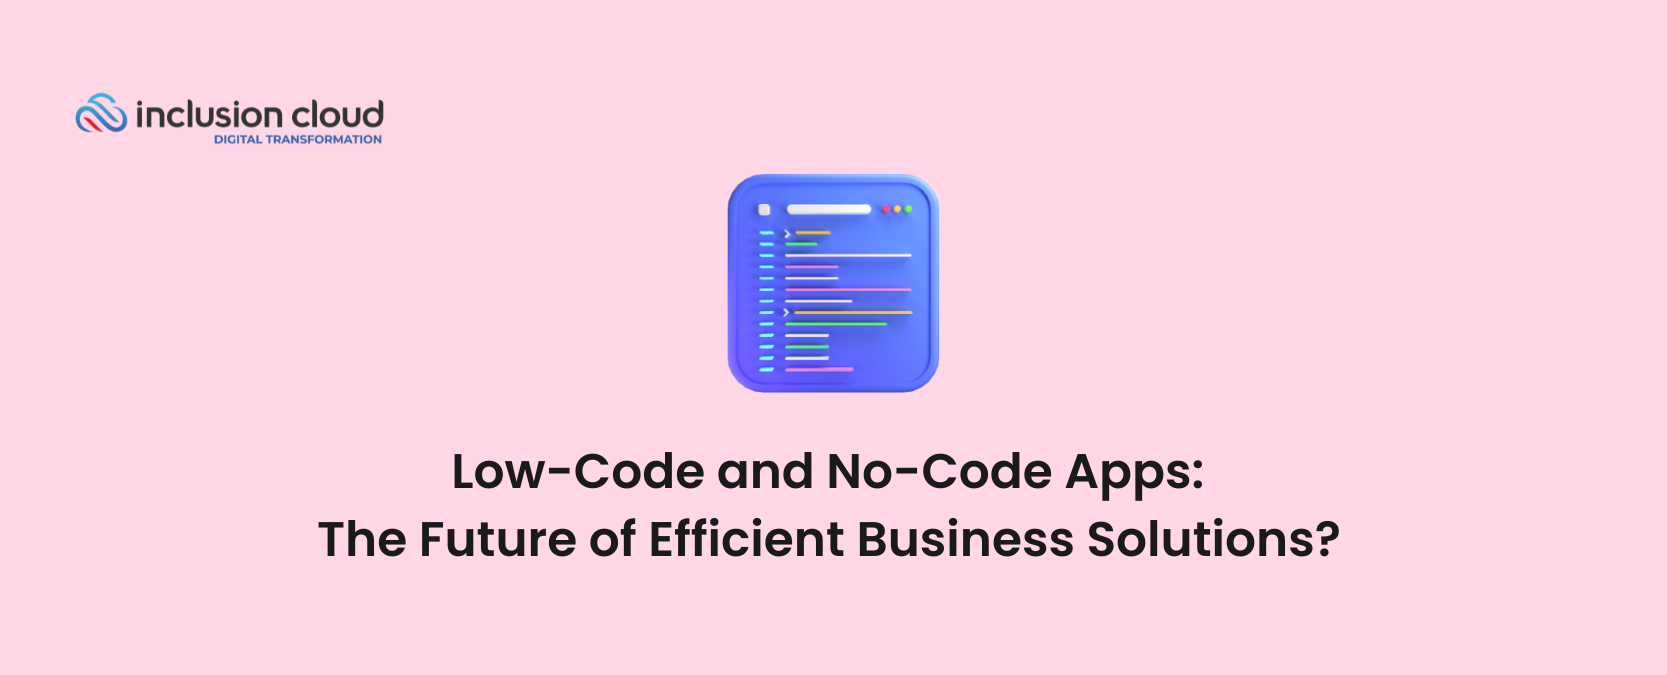 Low-Code and No-Code Apps The Future of Efficient Business Solutions